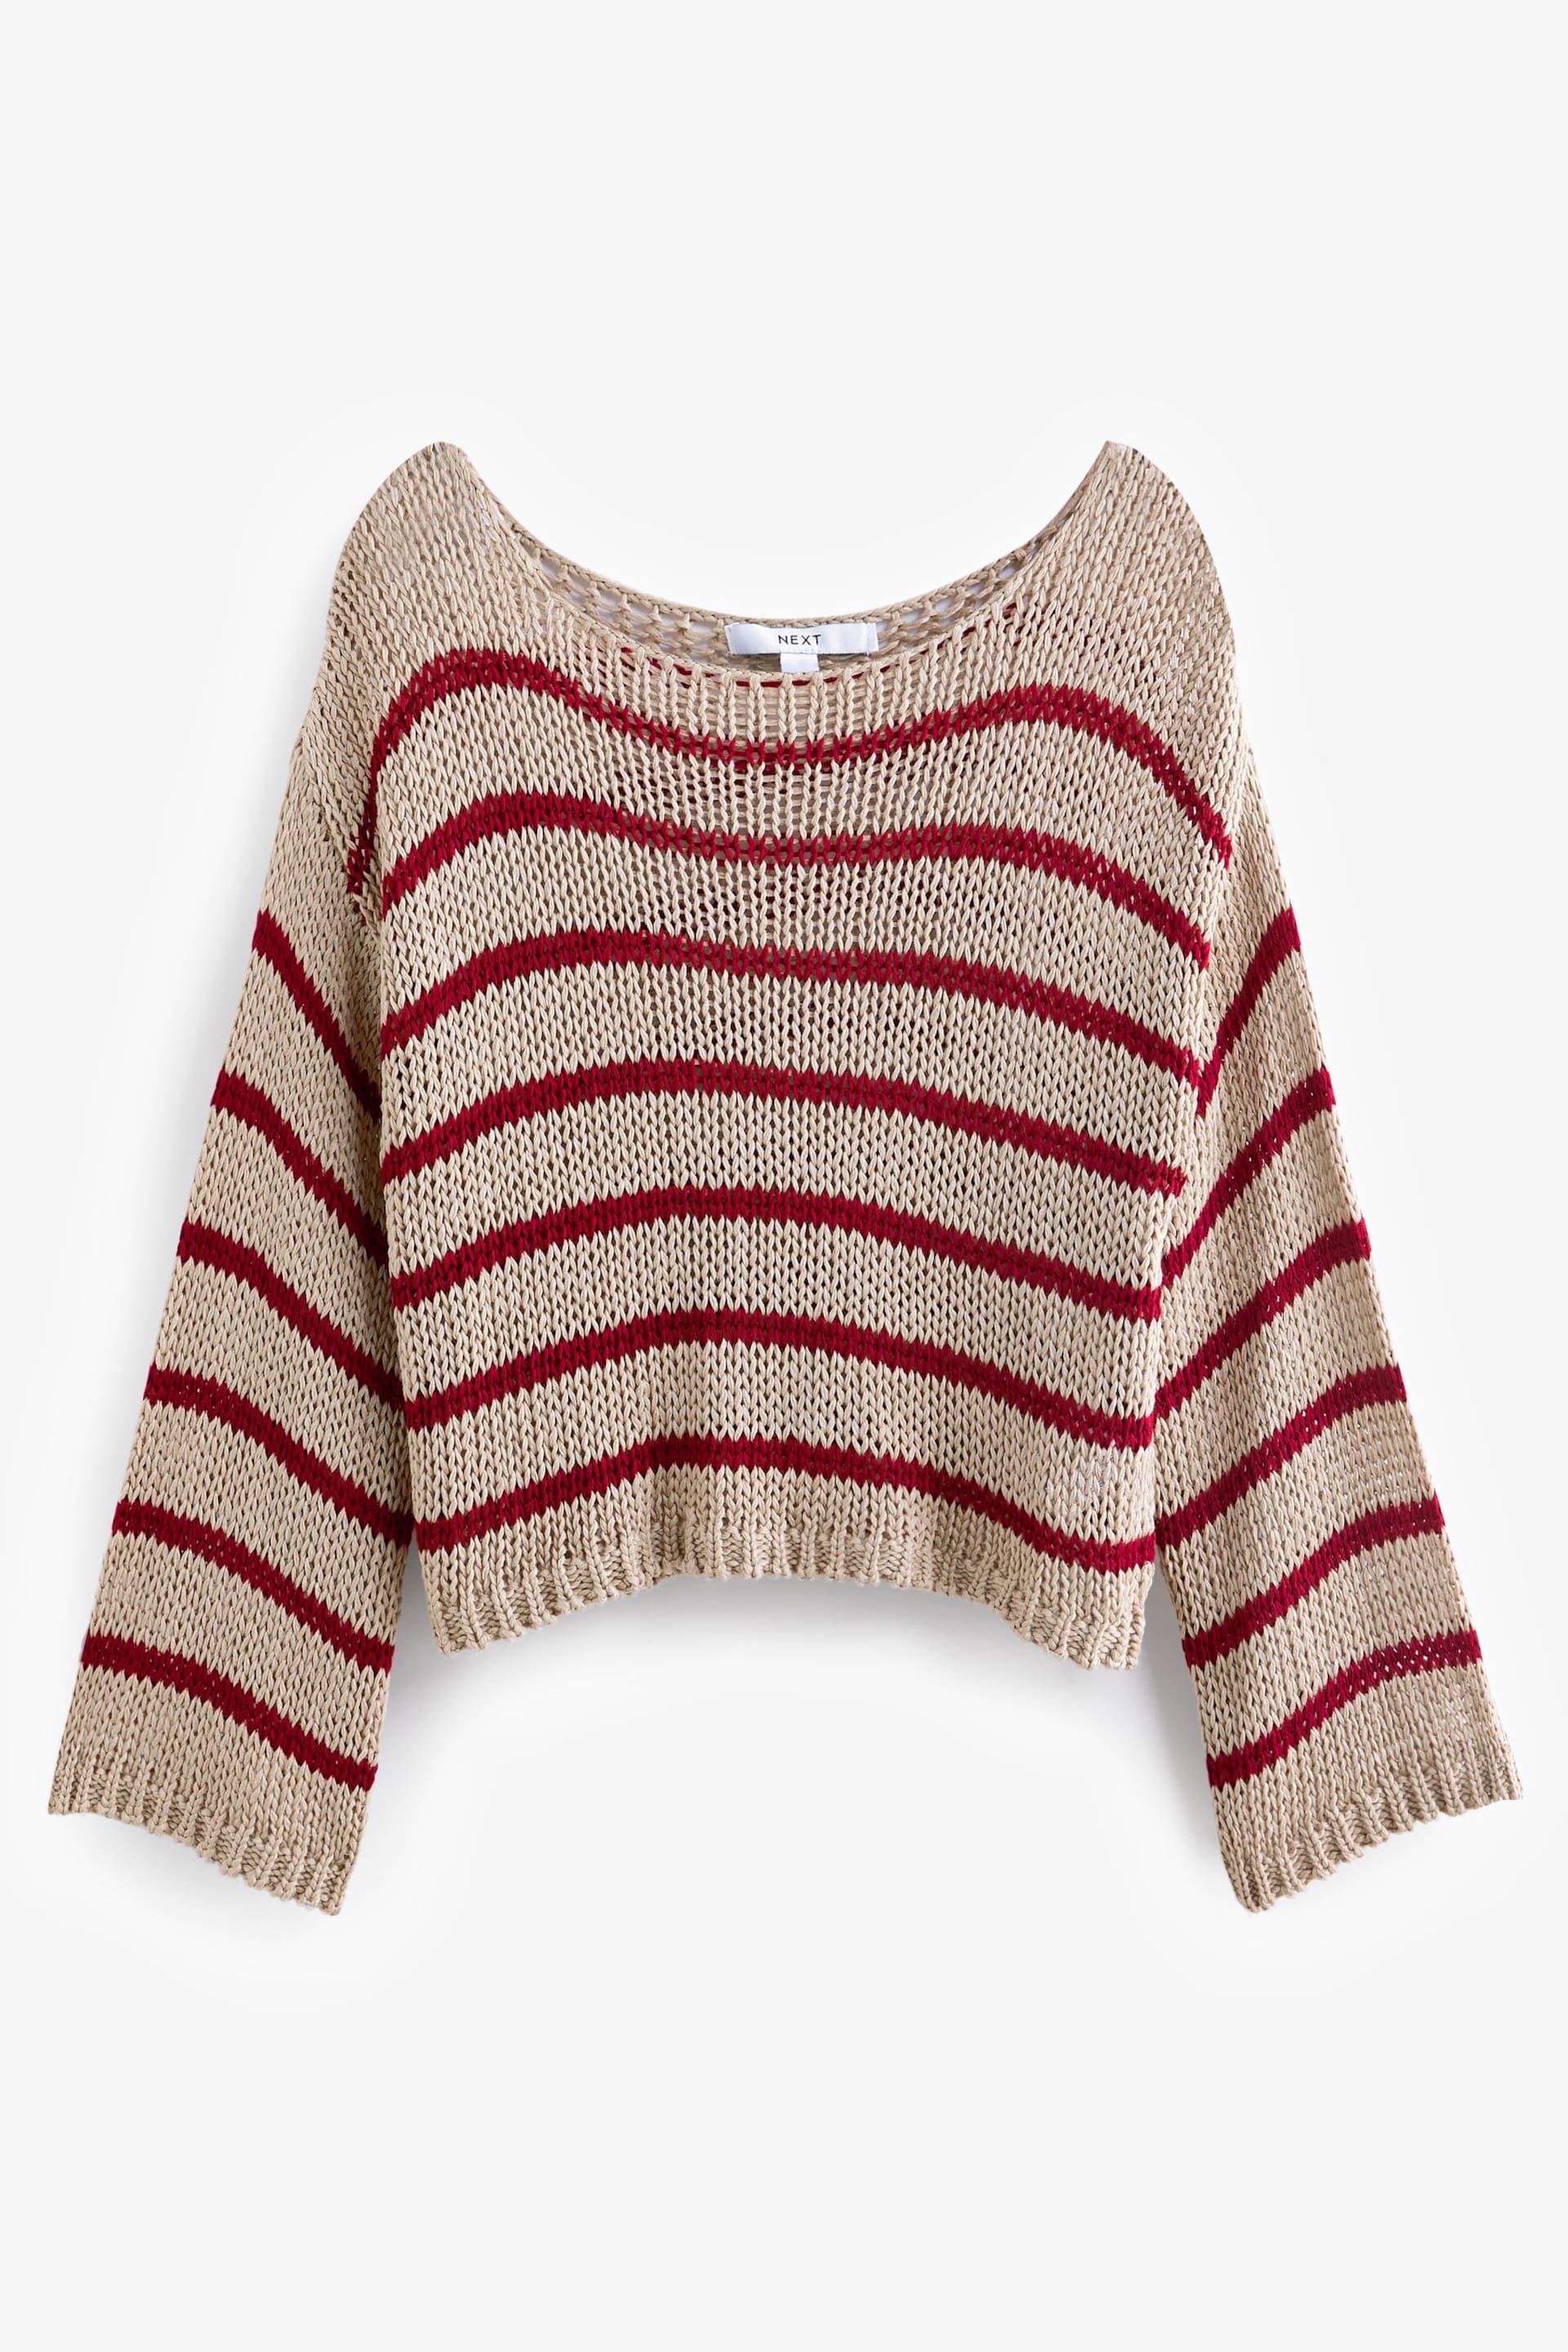 Neutral and Red Stripe Stitch Long Sleeve Jumper - Image 5 of 6